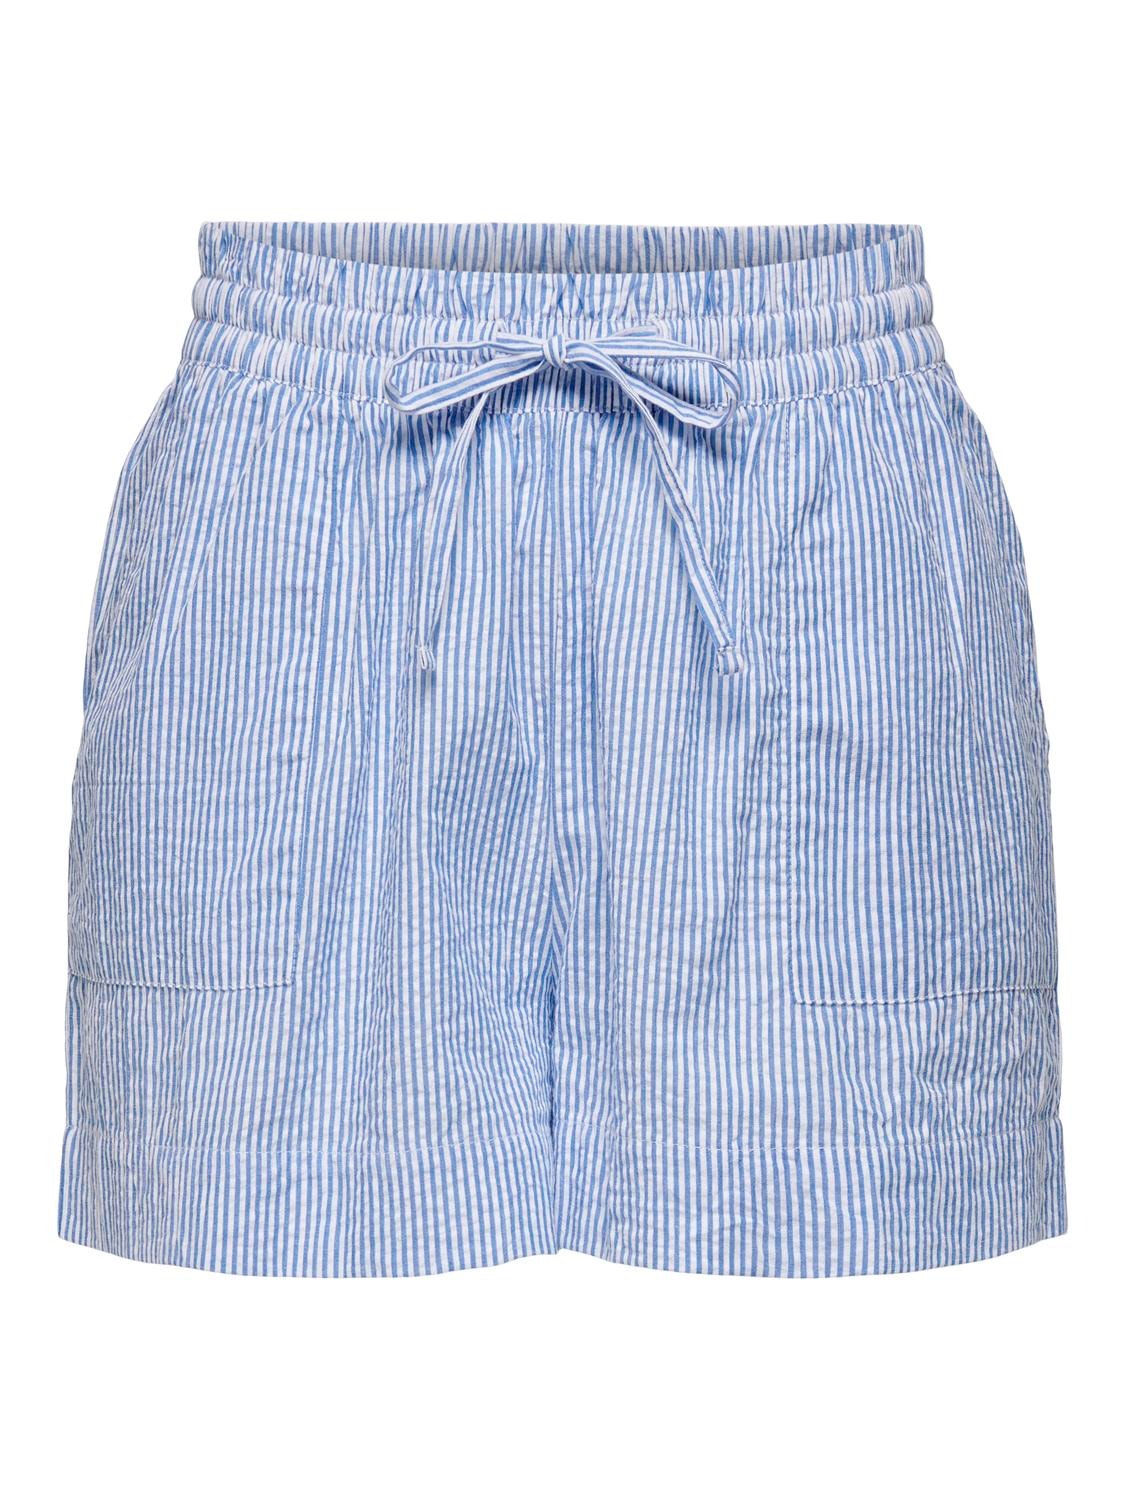 ONLY tie string shorts -French Blue - 15325018